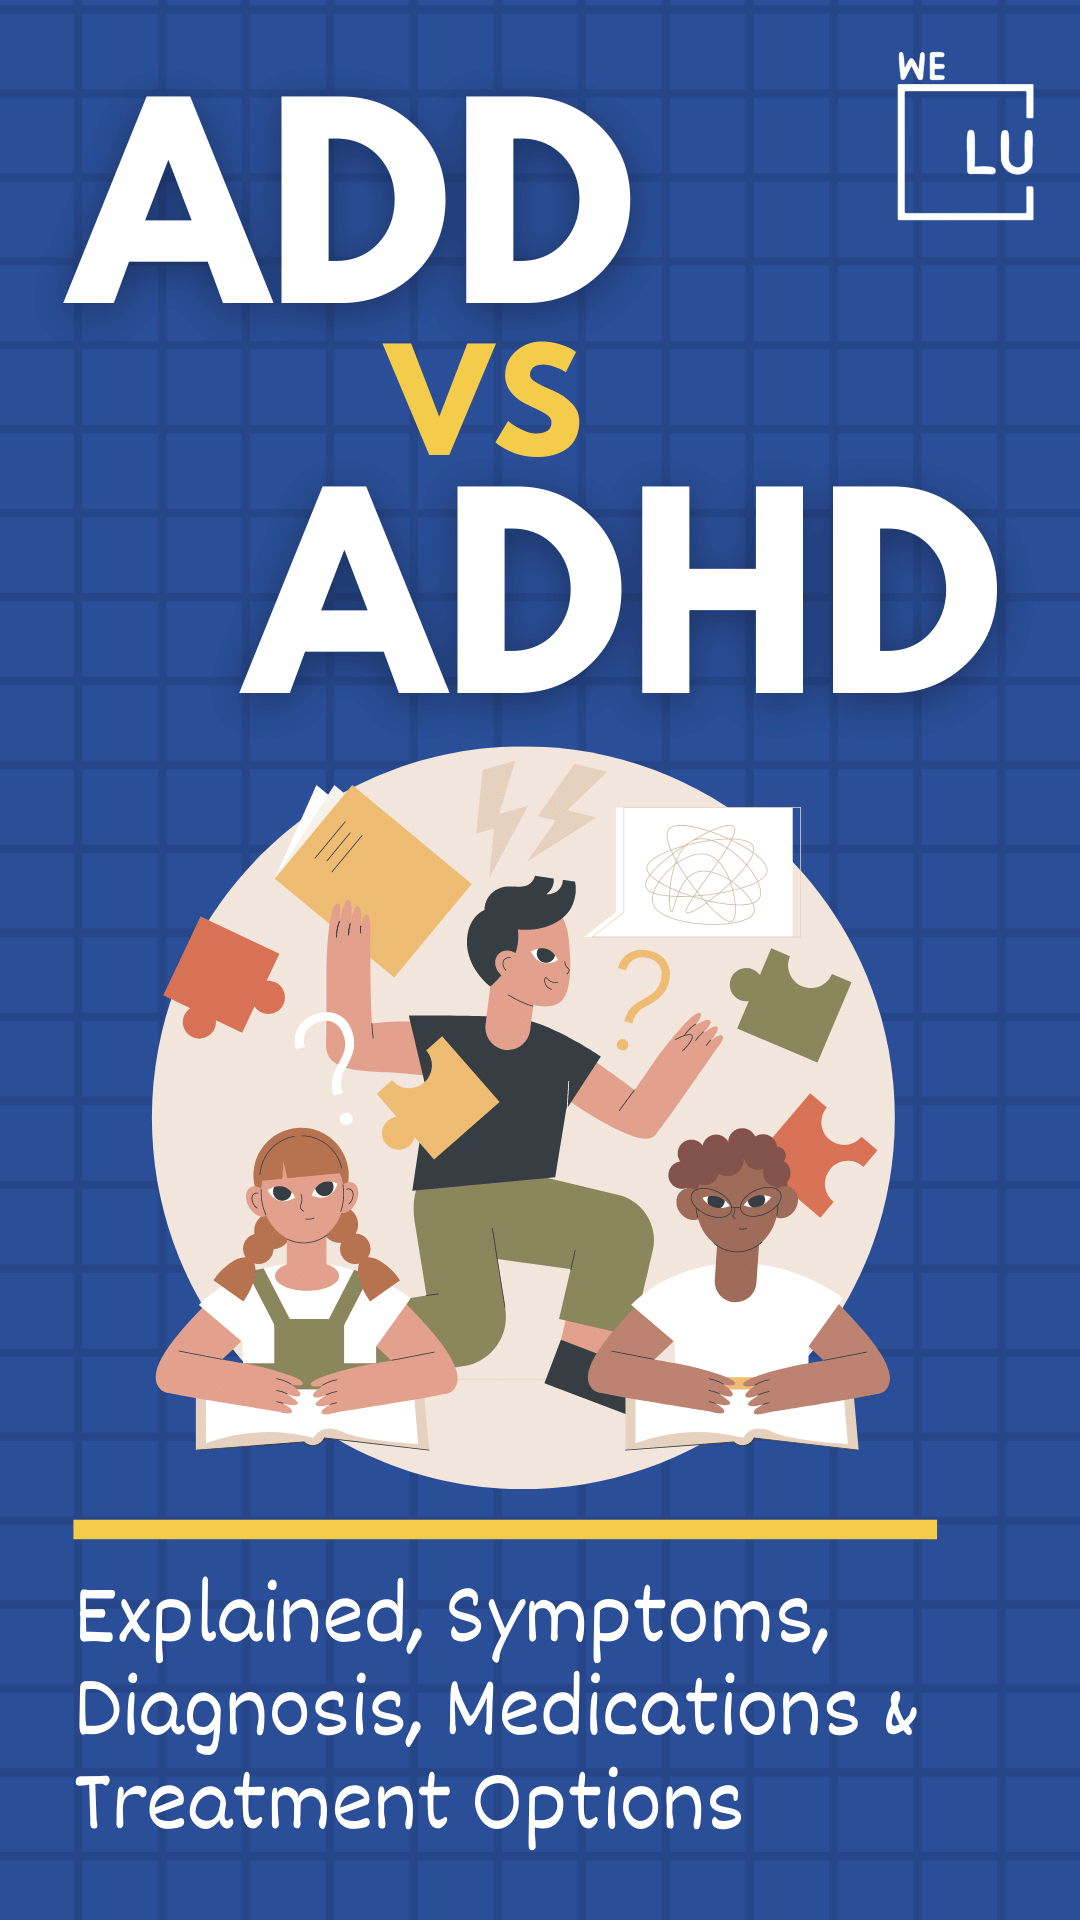 What is ADD vs ADHD in female adults? Though males are more commonly diagnosed with ADHD vs ADD than females, it’s becoming clearer that ADHD does not affect one gender more than the other.